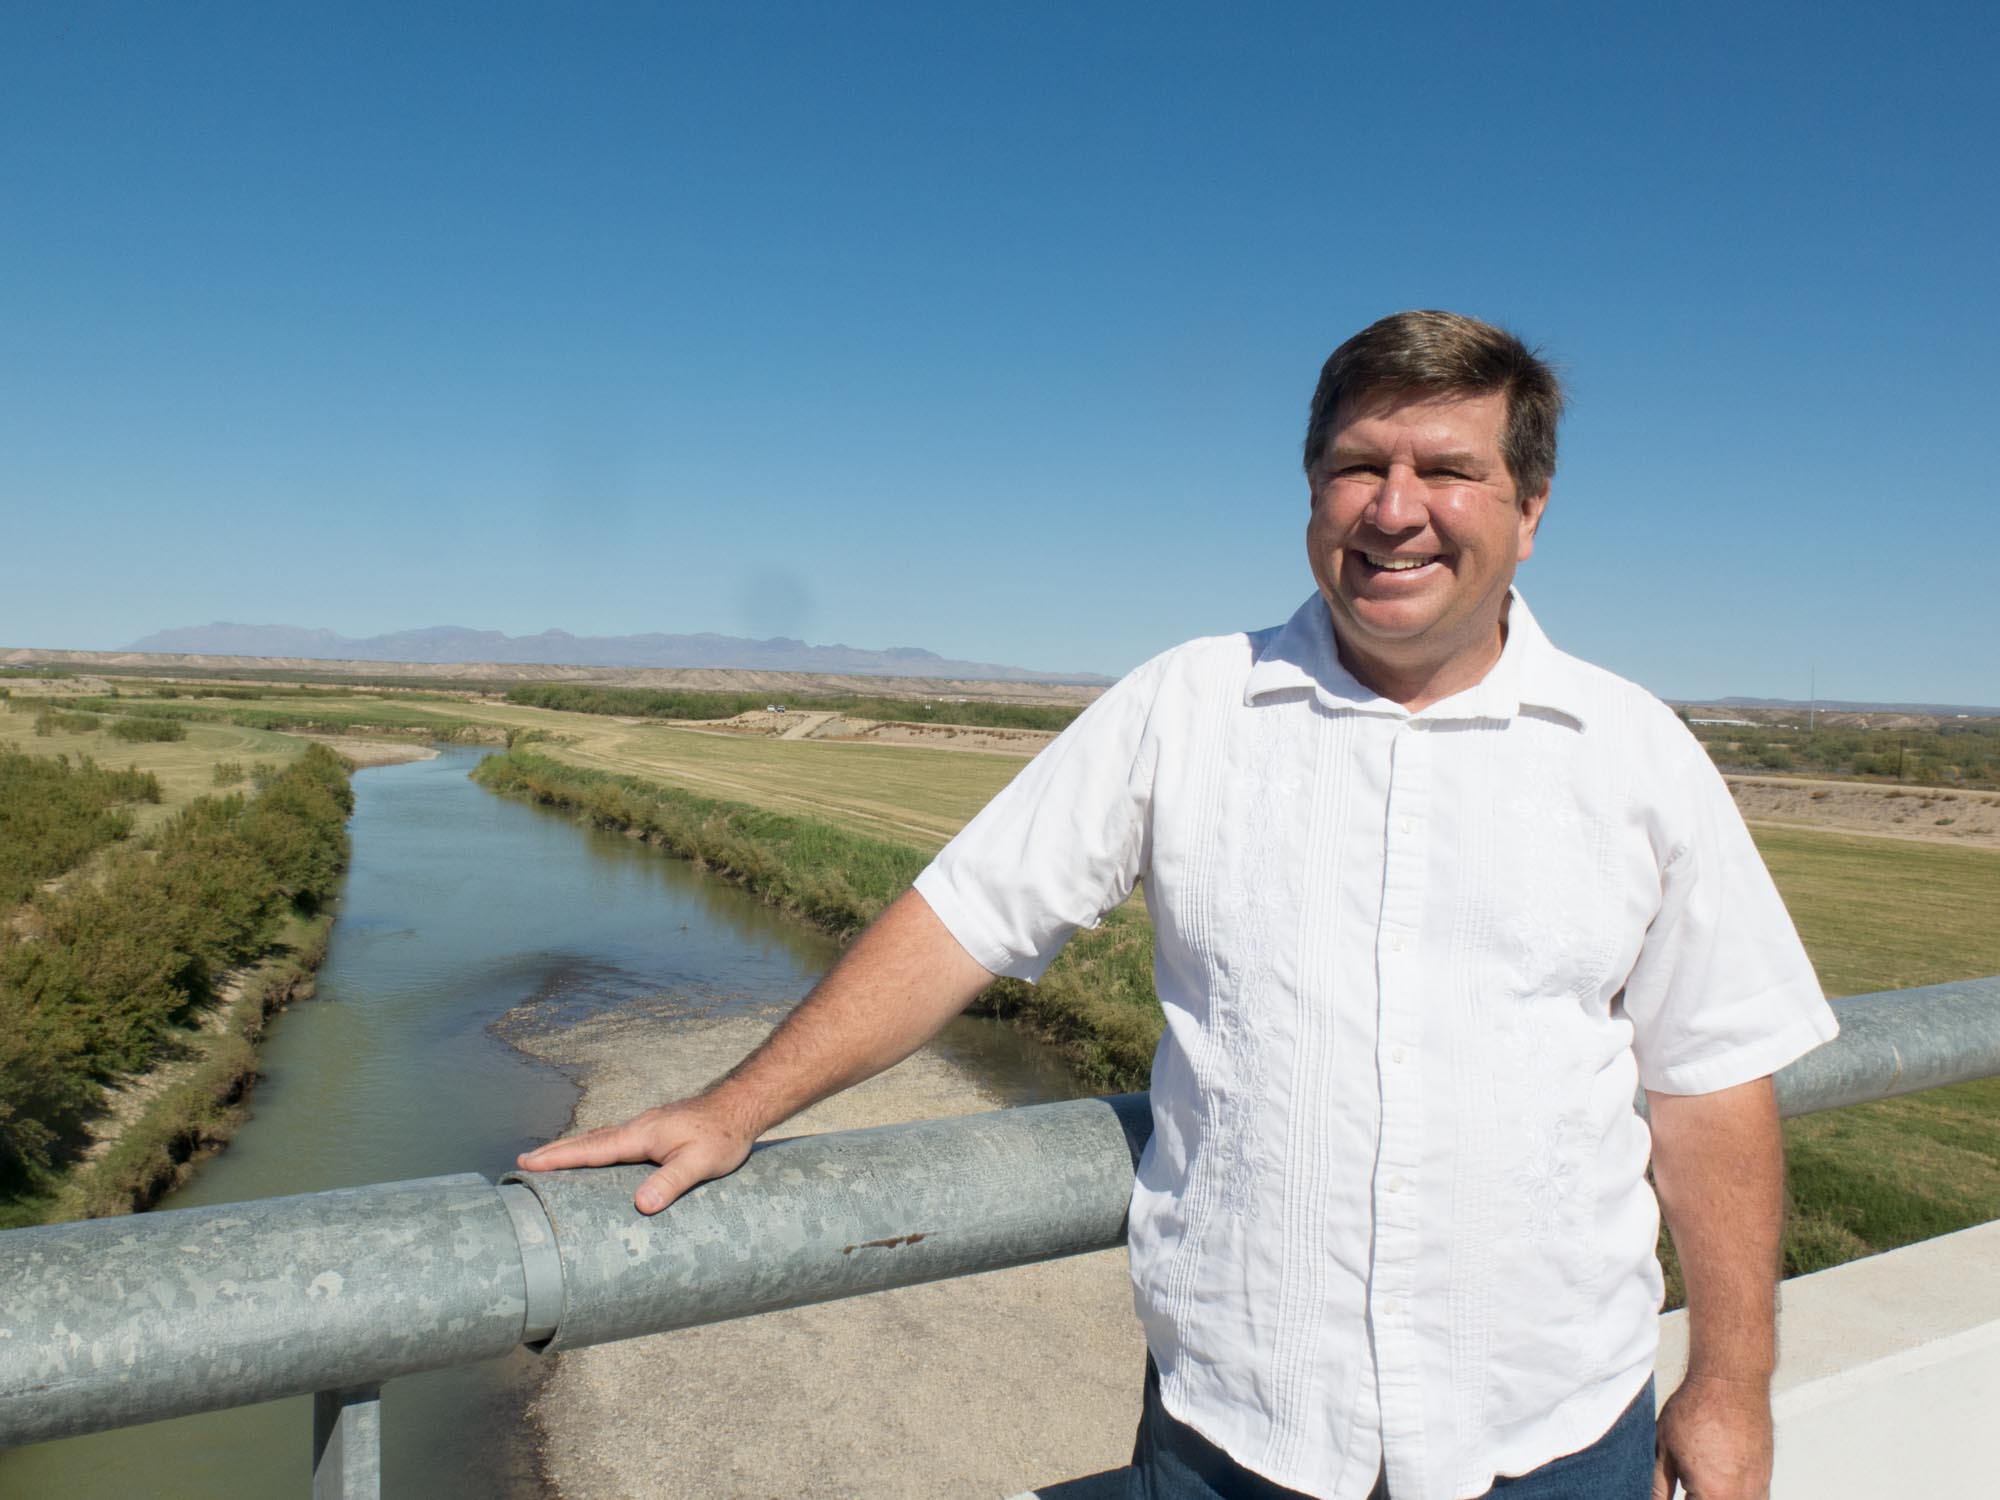 John Ferguson, Presidio mayor: “It's kind of a reaffirmation of what has been going on here for a long, long time. Presidio and Ojinaga are one large community. We're all kind of families spread across both cities.”